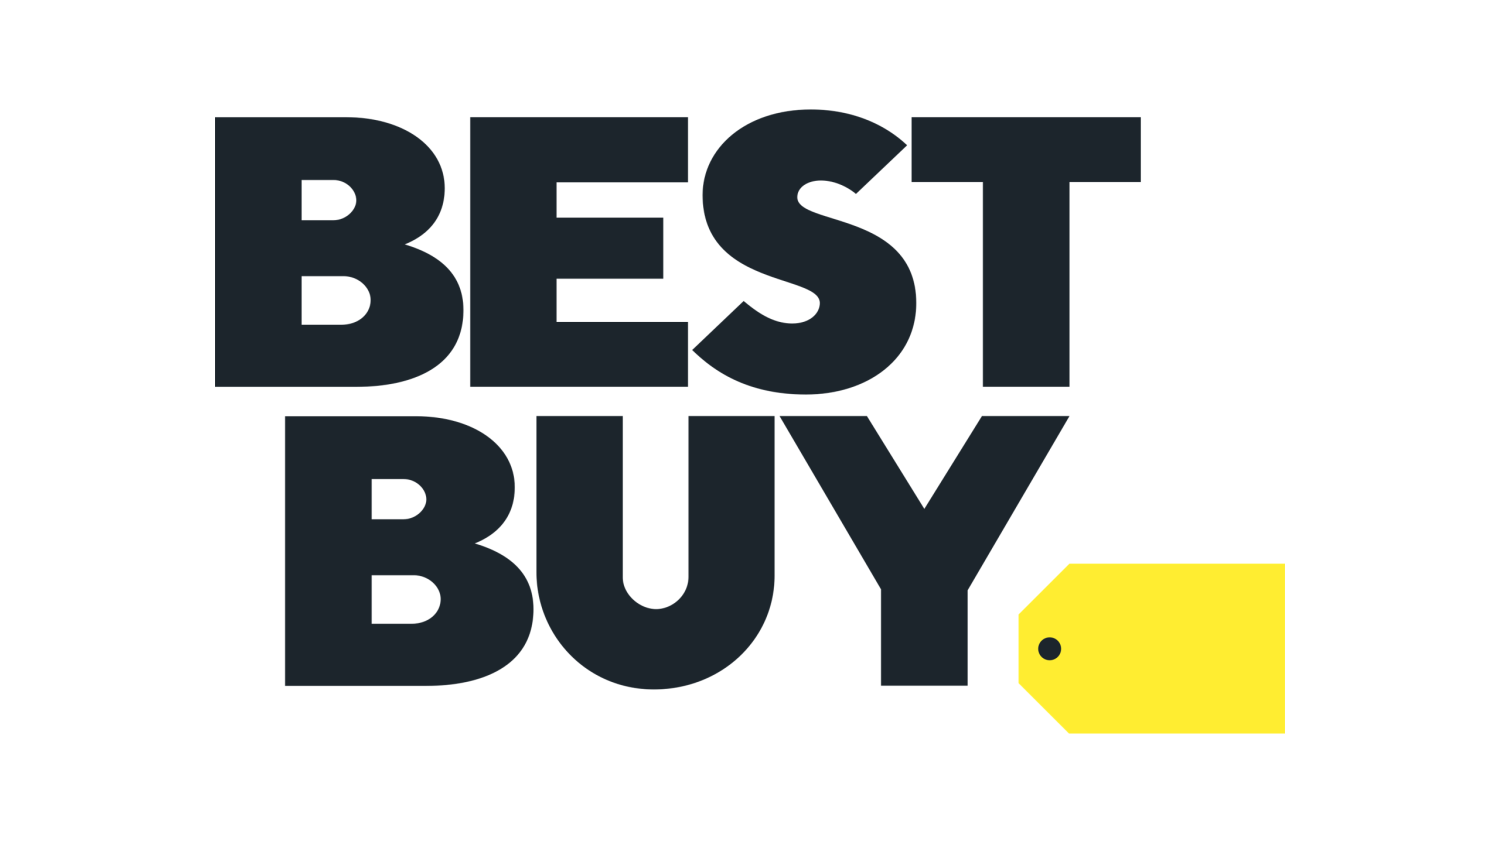 Best Buy is axing physical DVD and Blu-ray business in this